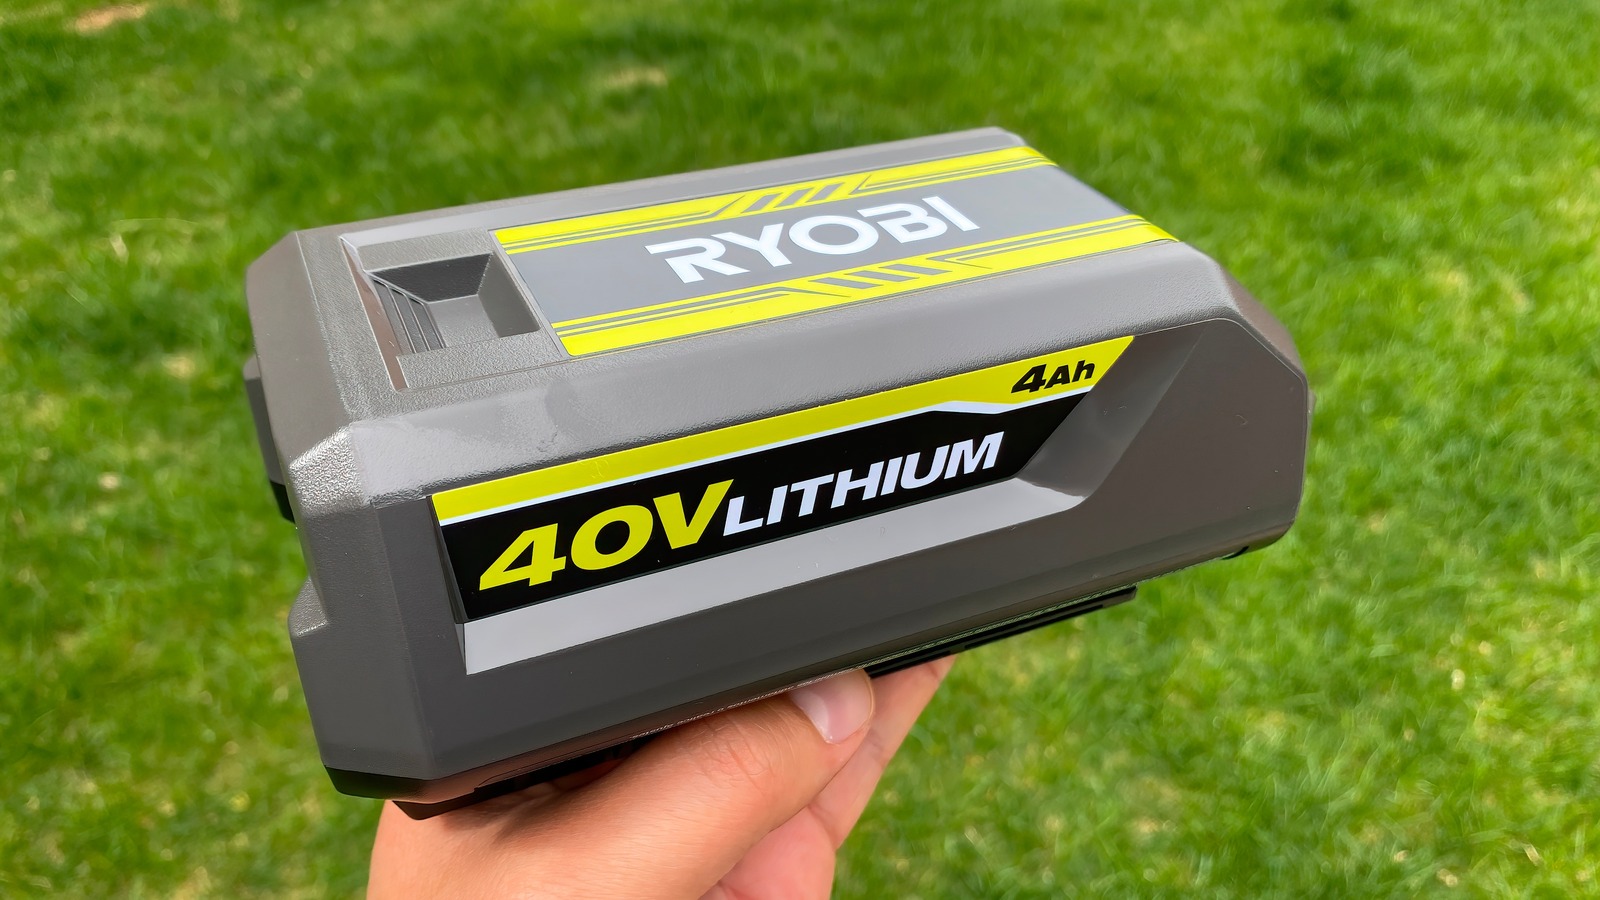 Can Ryobi Batteries Be Used With Other Brand Tools? Compatibility Explained